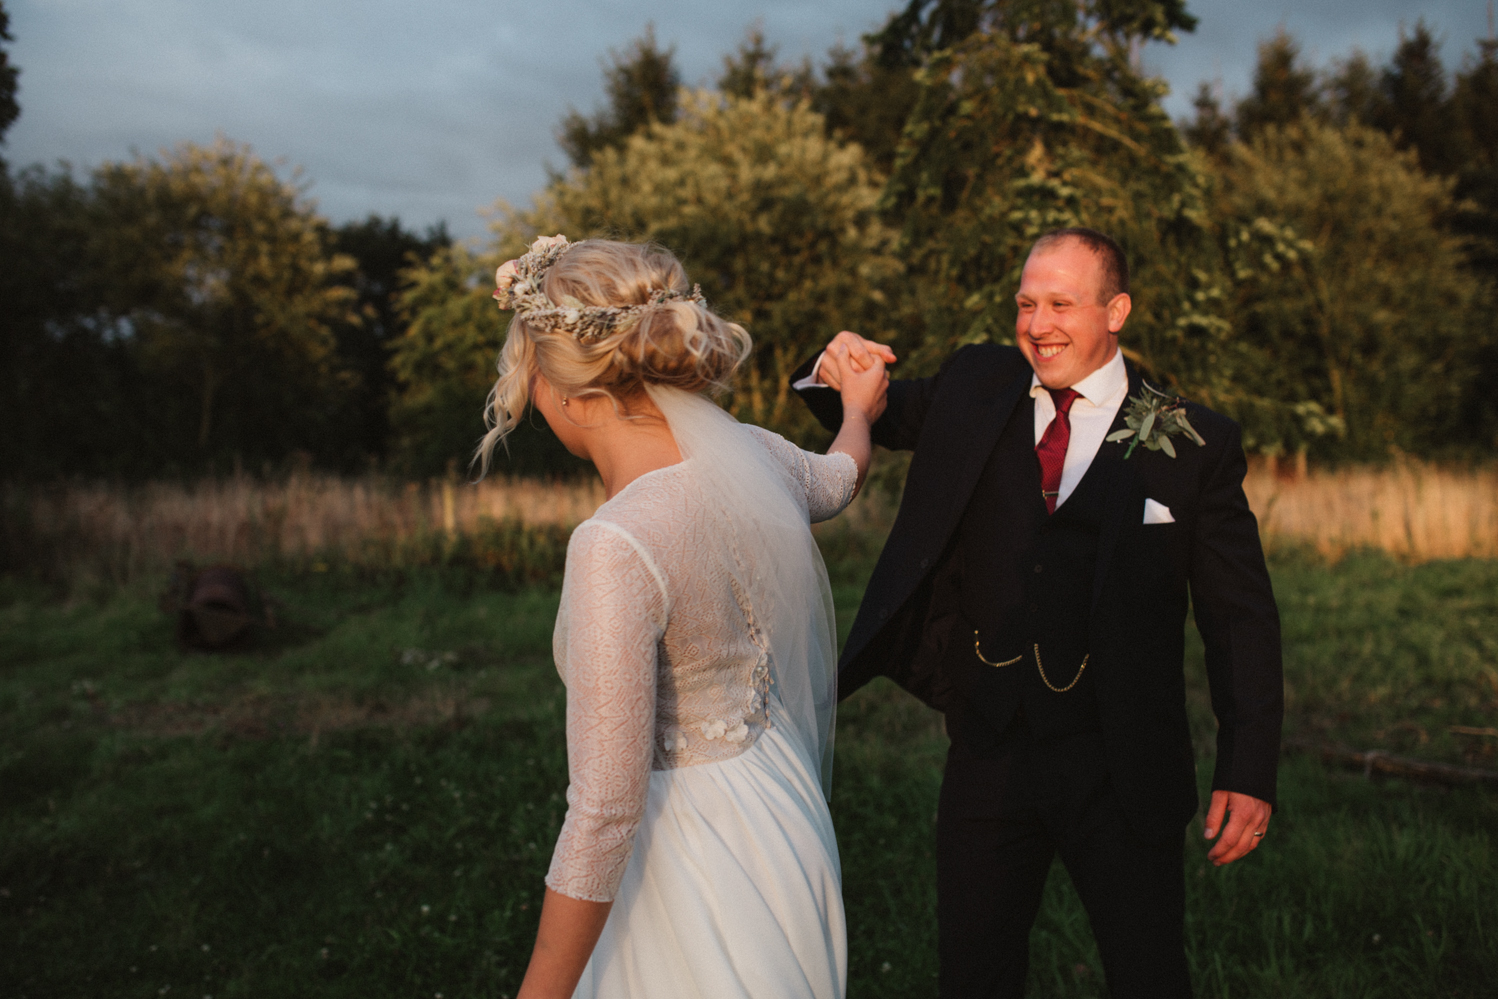 relaxed bride and groom dancing at sunset wedding in woodbridge, suffolk 